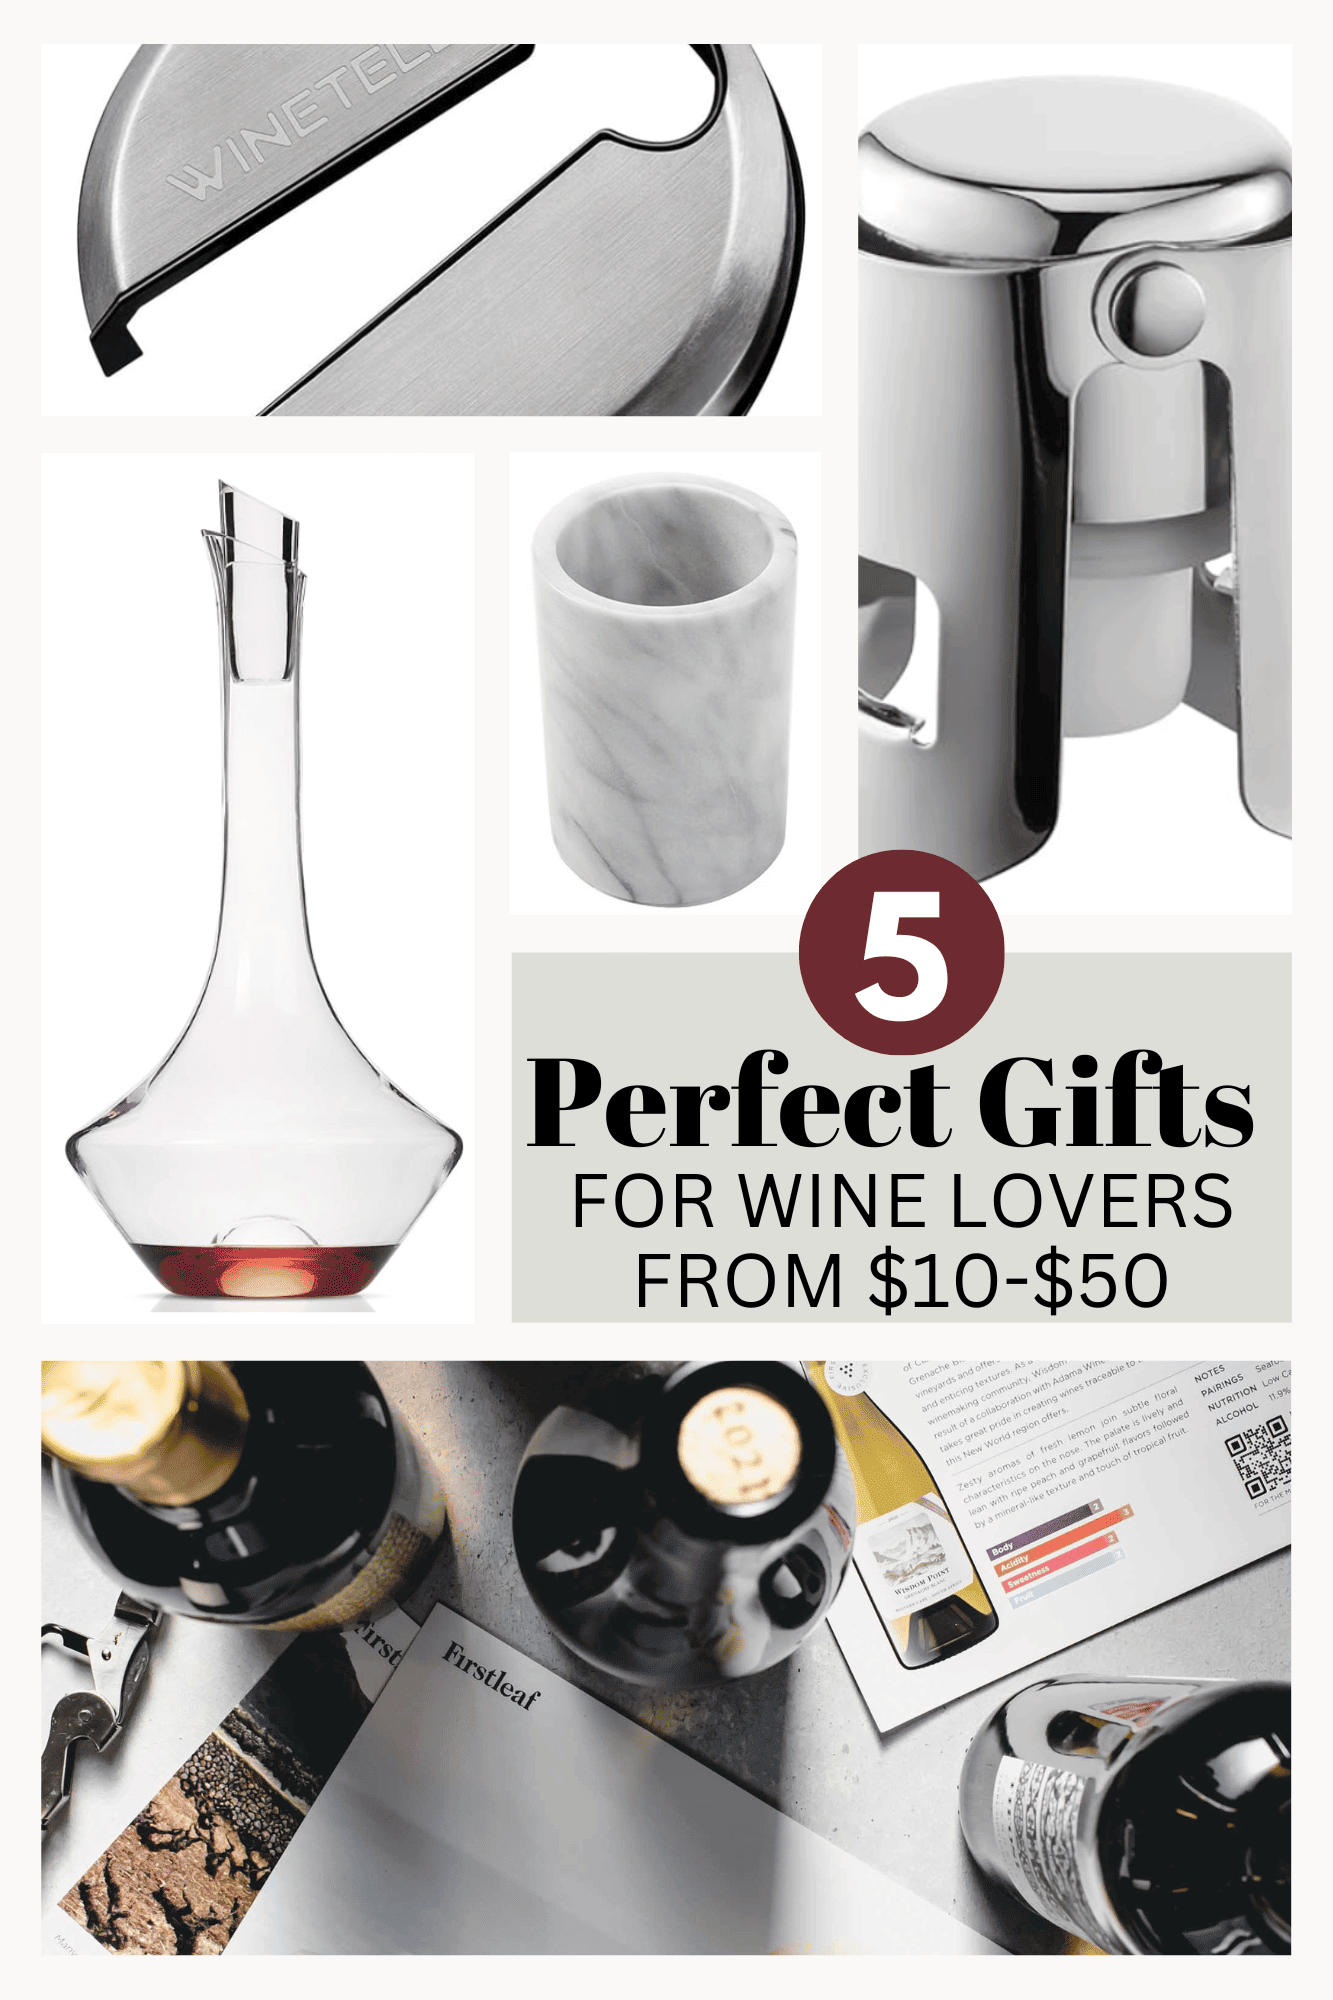 Collage of wine gifts with text overlay.